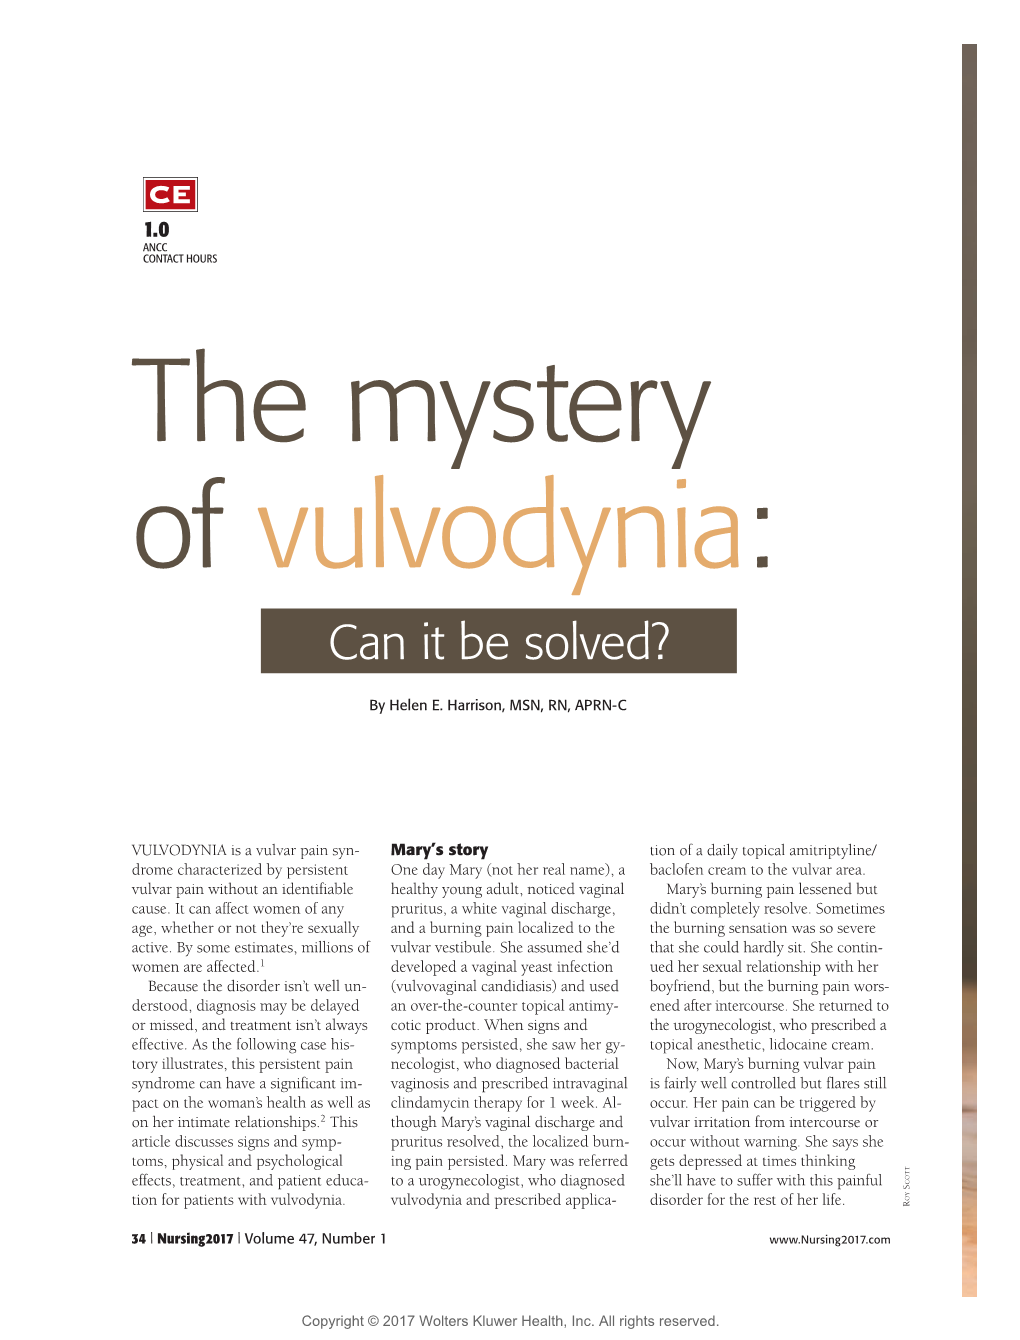 The Mystery of Vulvodynia: Can It Be Solved?